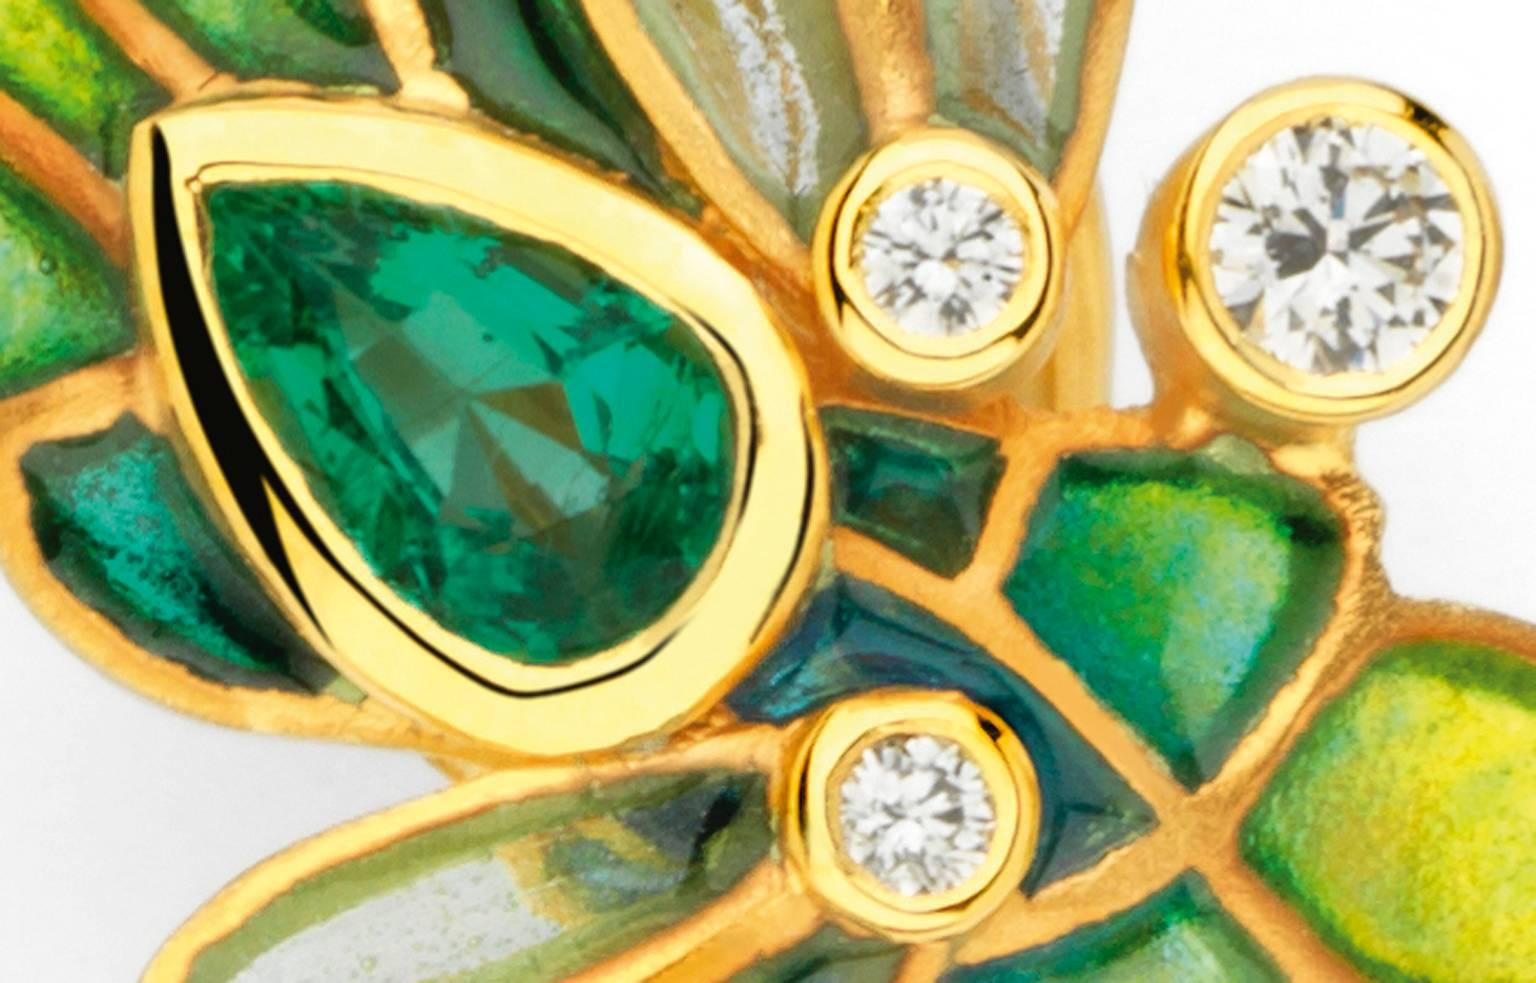 18Kt yellow gold, emeralds, diamonds and fire enamel earrings (post and clip)
edition of 15
signed and numbered

“The Fly is for us a symbol of freedom. It can go anywhere, be everywhere and we don’t even notice its presence, because she is so